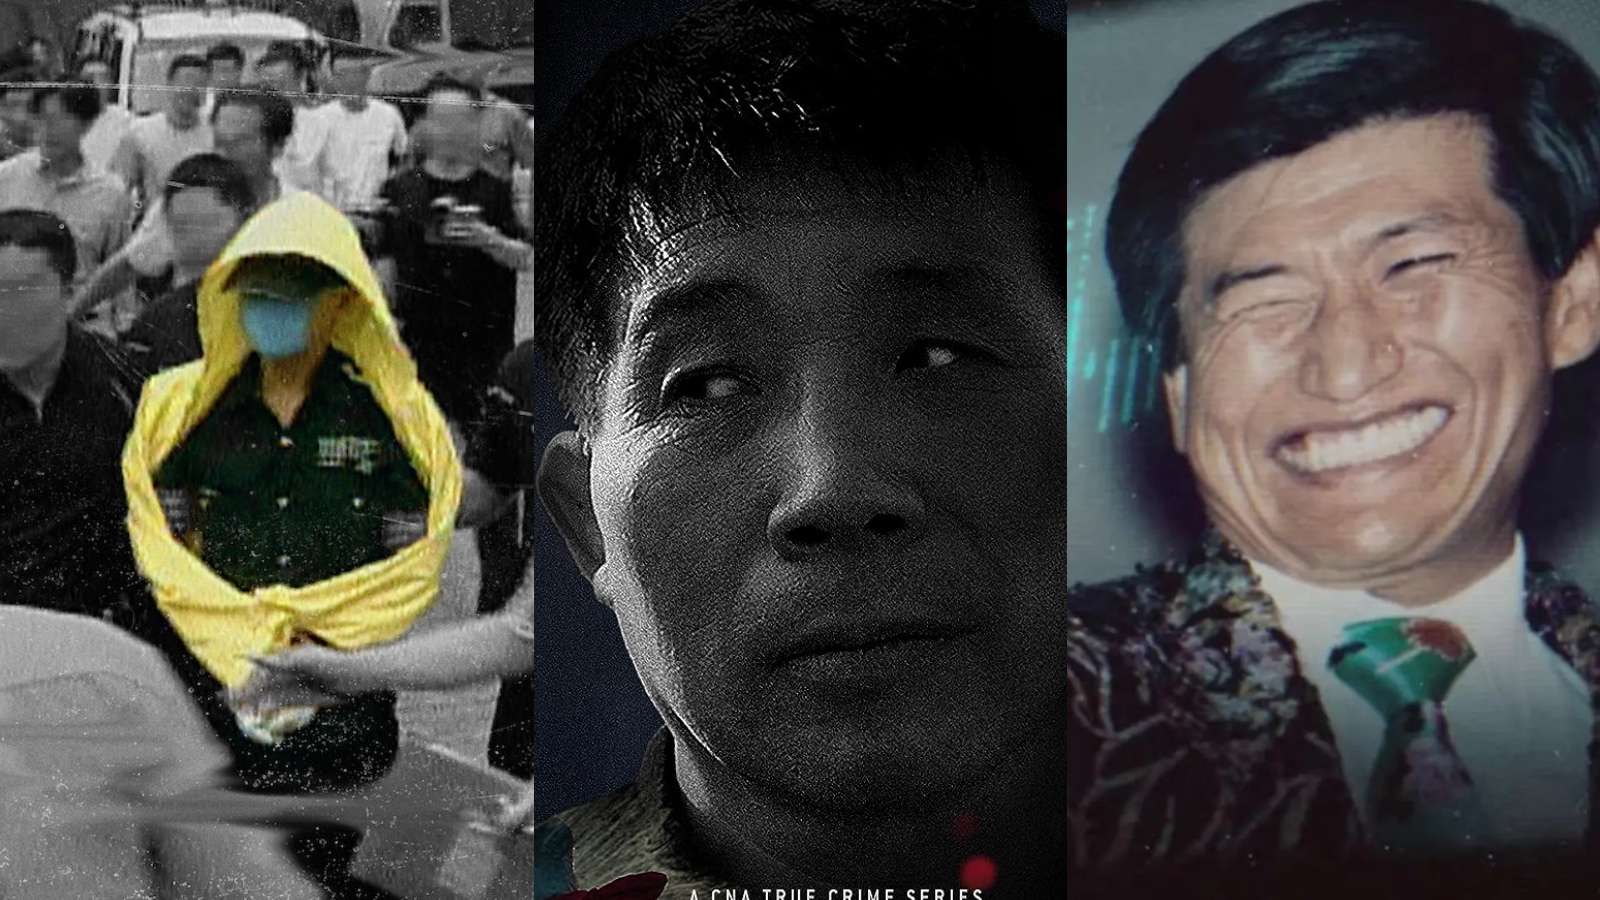 The Raincoar Killer, The Hwaseong Murders, and In the Name of God docuseries